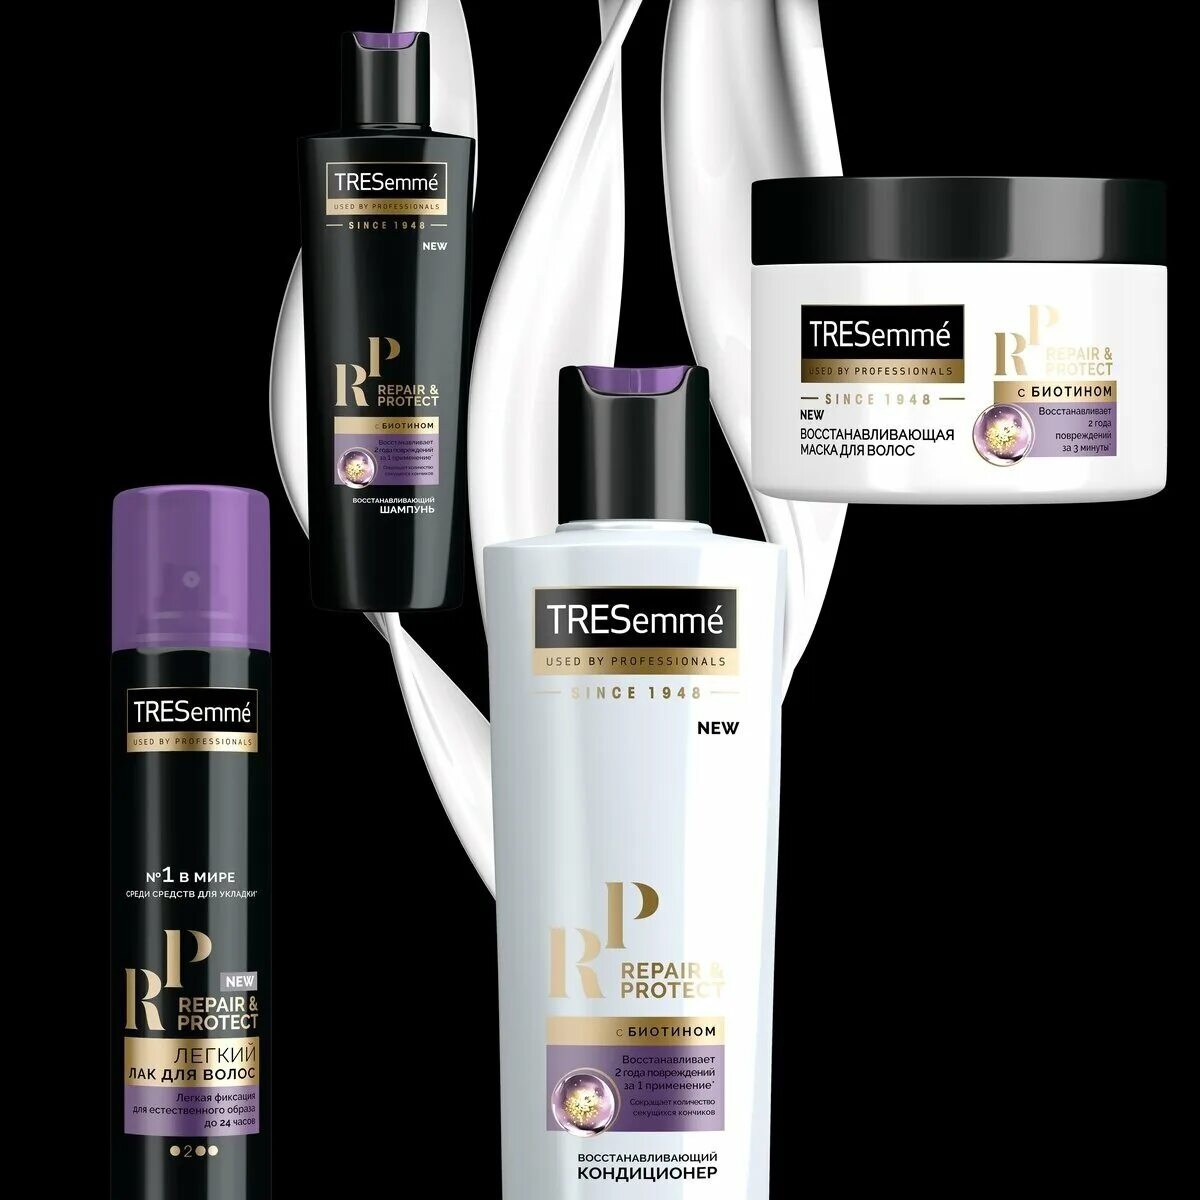 Tresemme кондиционер для волос. Кондиционер TRESEMME 400мл Repair and protect. TRESEMME Repair protect маска. TRESEMME Repair & protect шампунь восстанавливающий 400 мл. TRESEMME Repair and protect кондиционер.